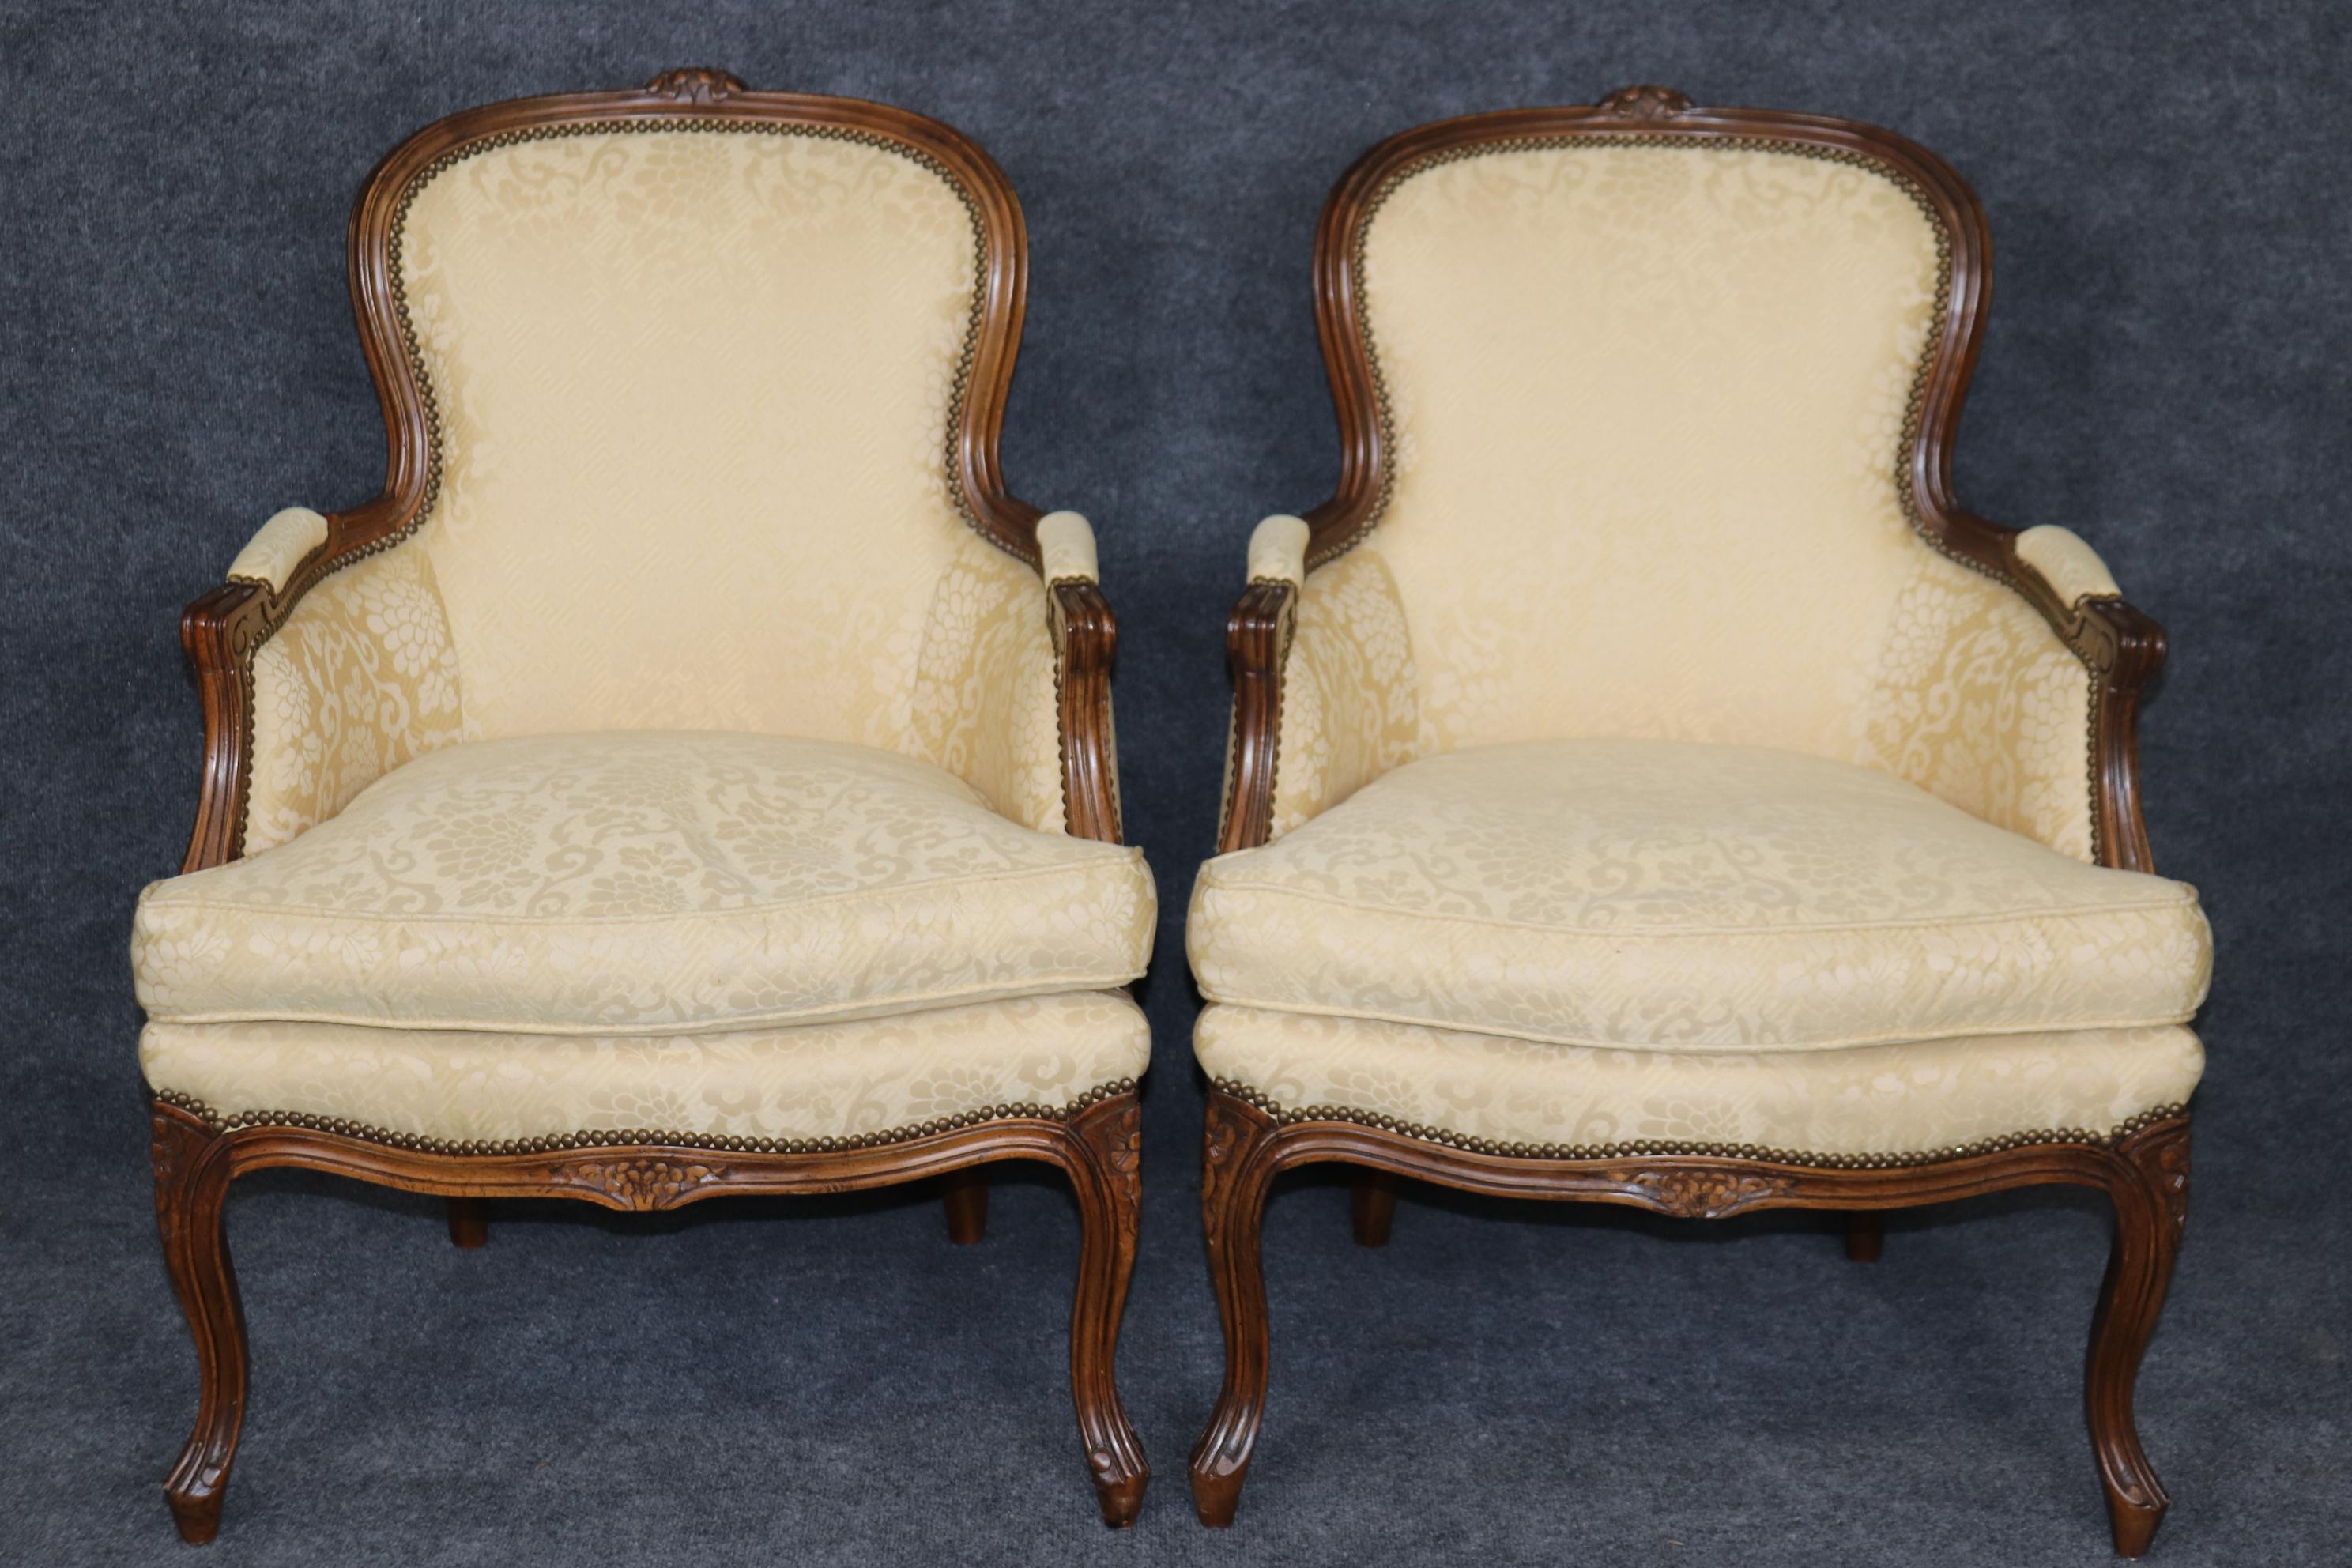 Dimensions: Height: 36 3/4in Width: 27in Depth: 27 1/2in Seat Height: 19 1/4in 

This pair of Louis XV style bergeres, armchairs, club chairs by W & T Sloane is made of the highest quality and is perfect for you and your home! If you look at the